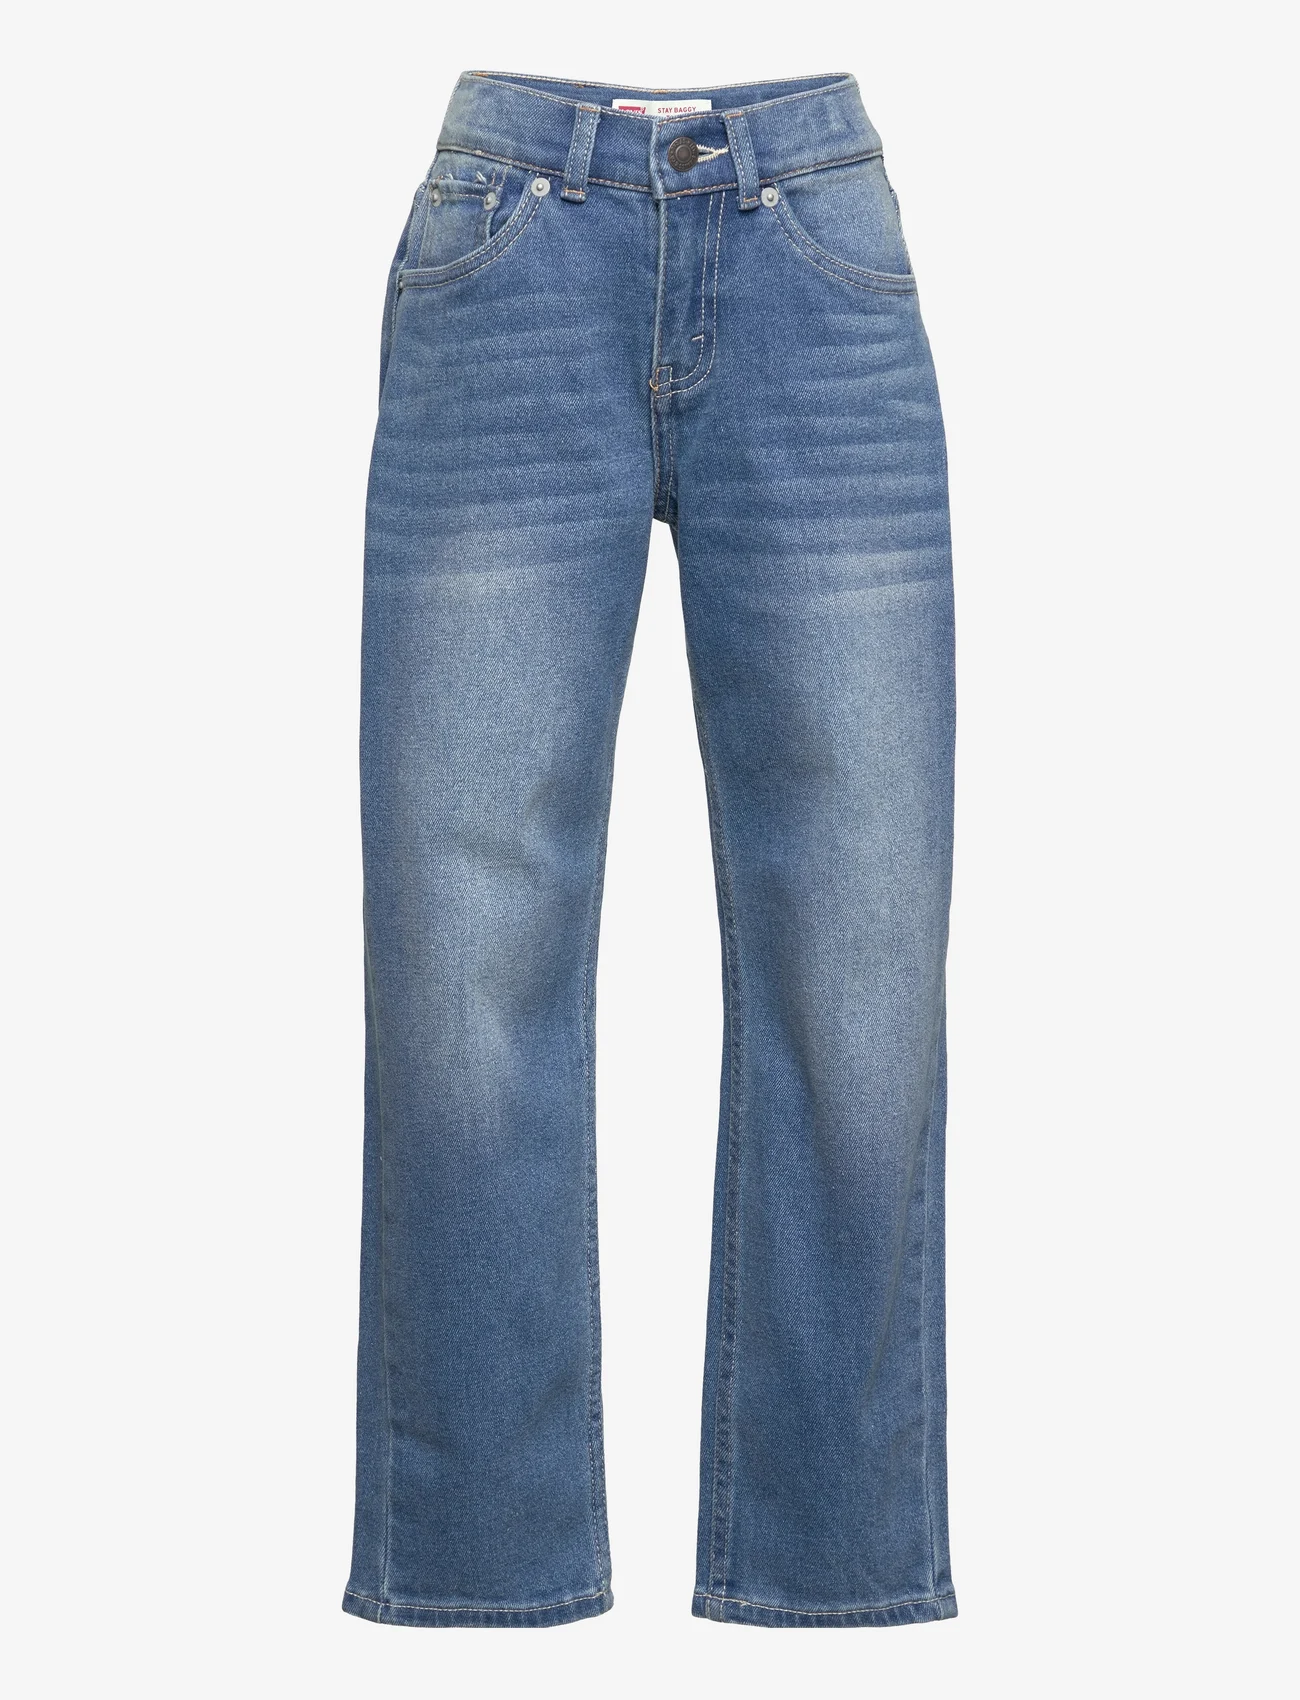 Levi's - Levi's® Stay Baggy Tapered Jeans - loose jeans - blue - 0